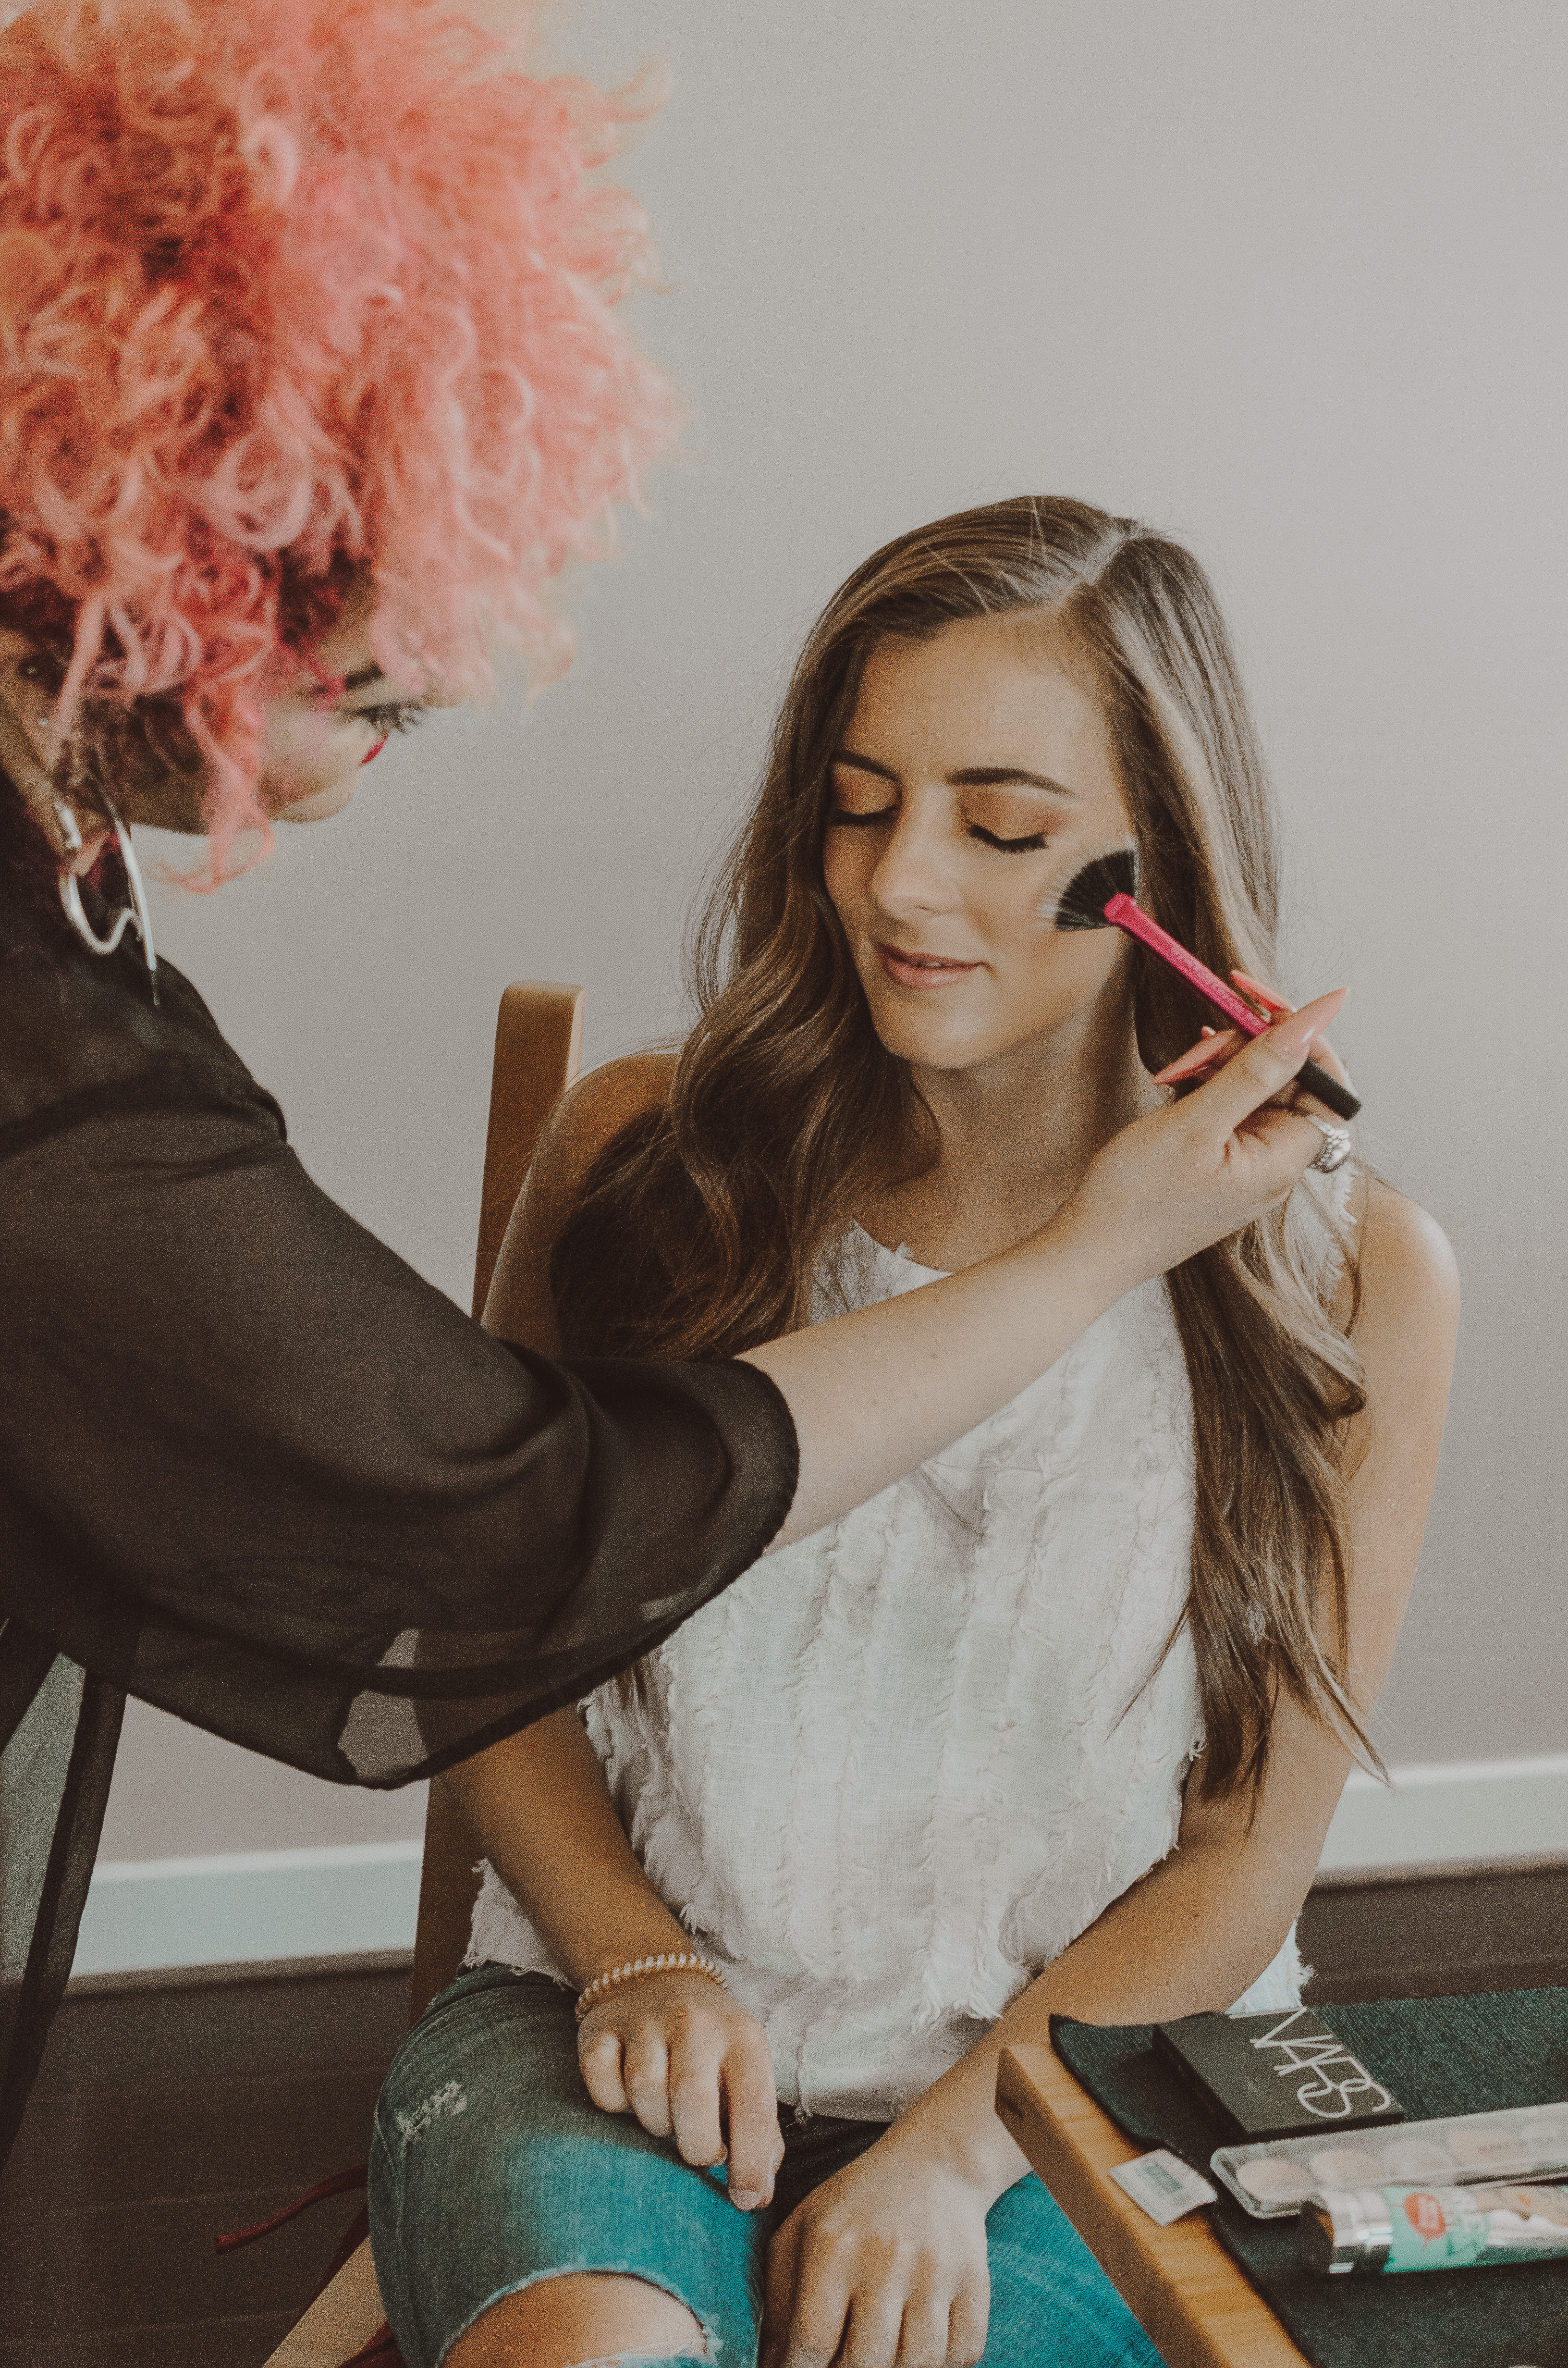 Getting Glam with Glamsquad